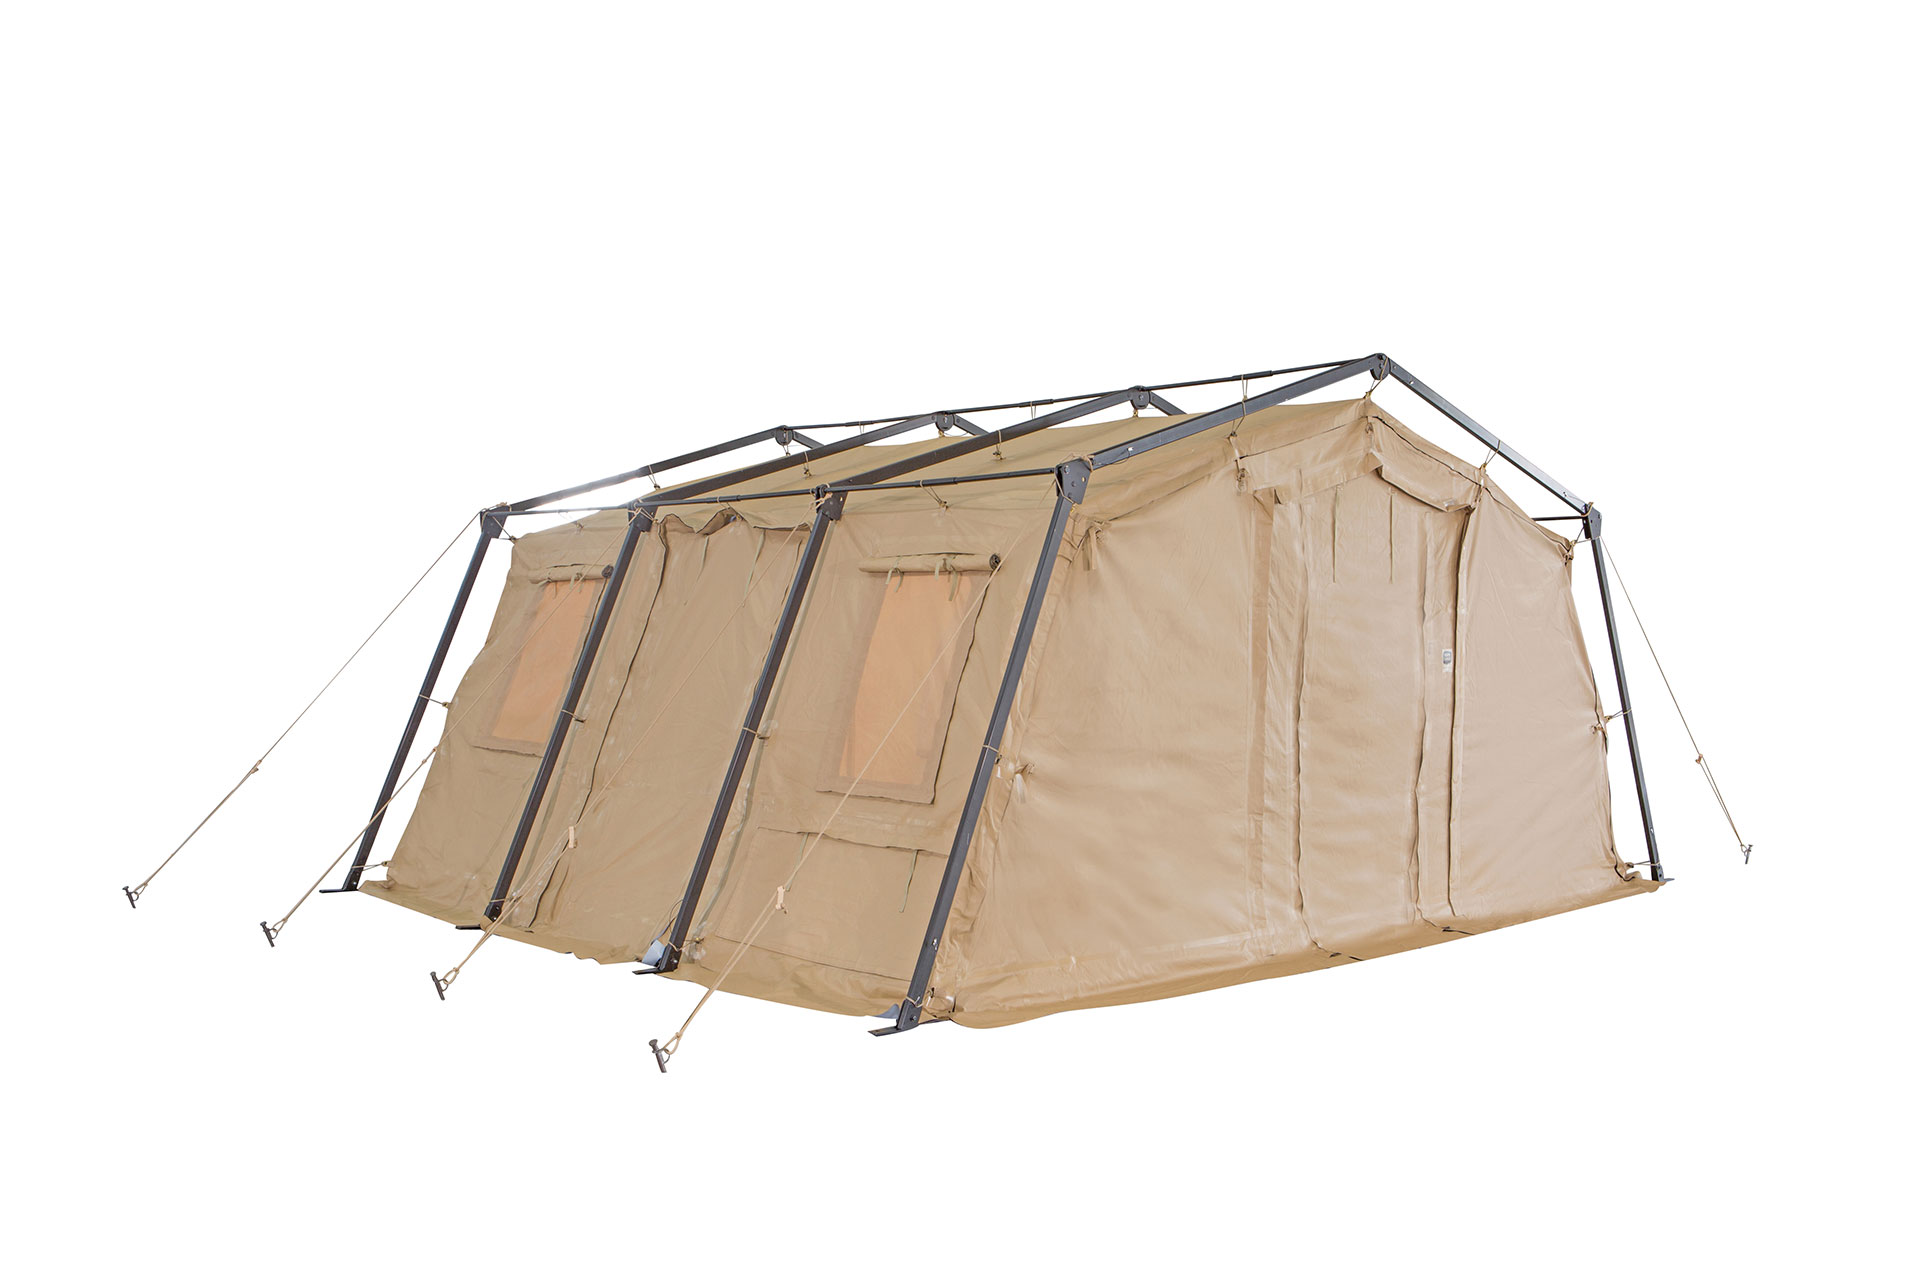 CAMSS 18TAC15 Rapid Deployment Military Shelter System